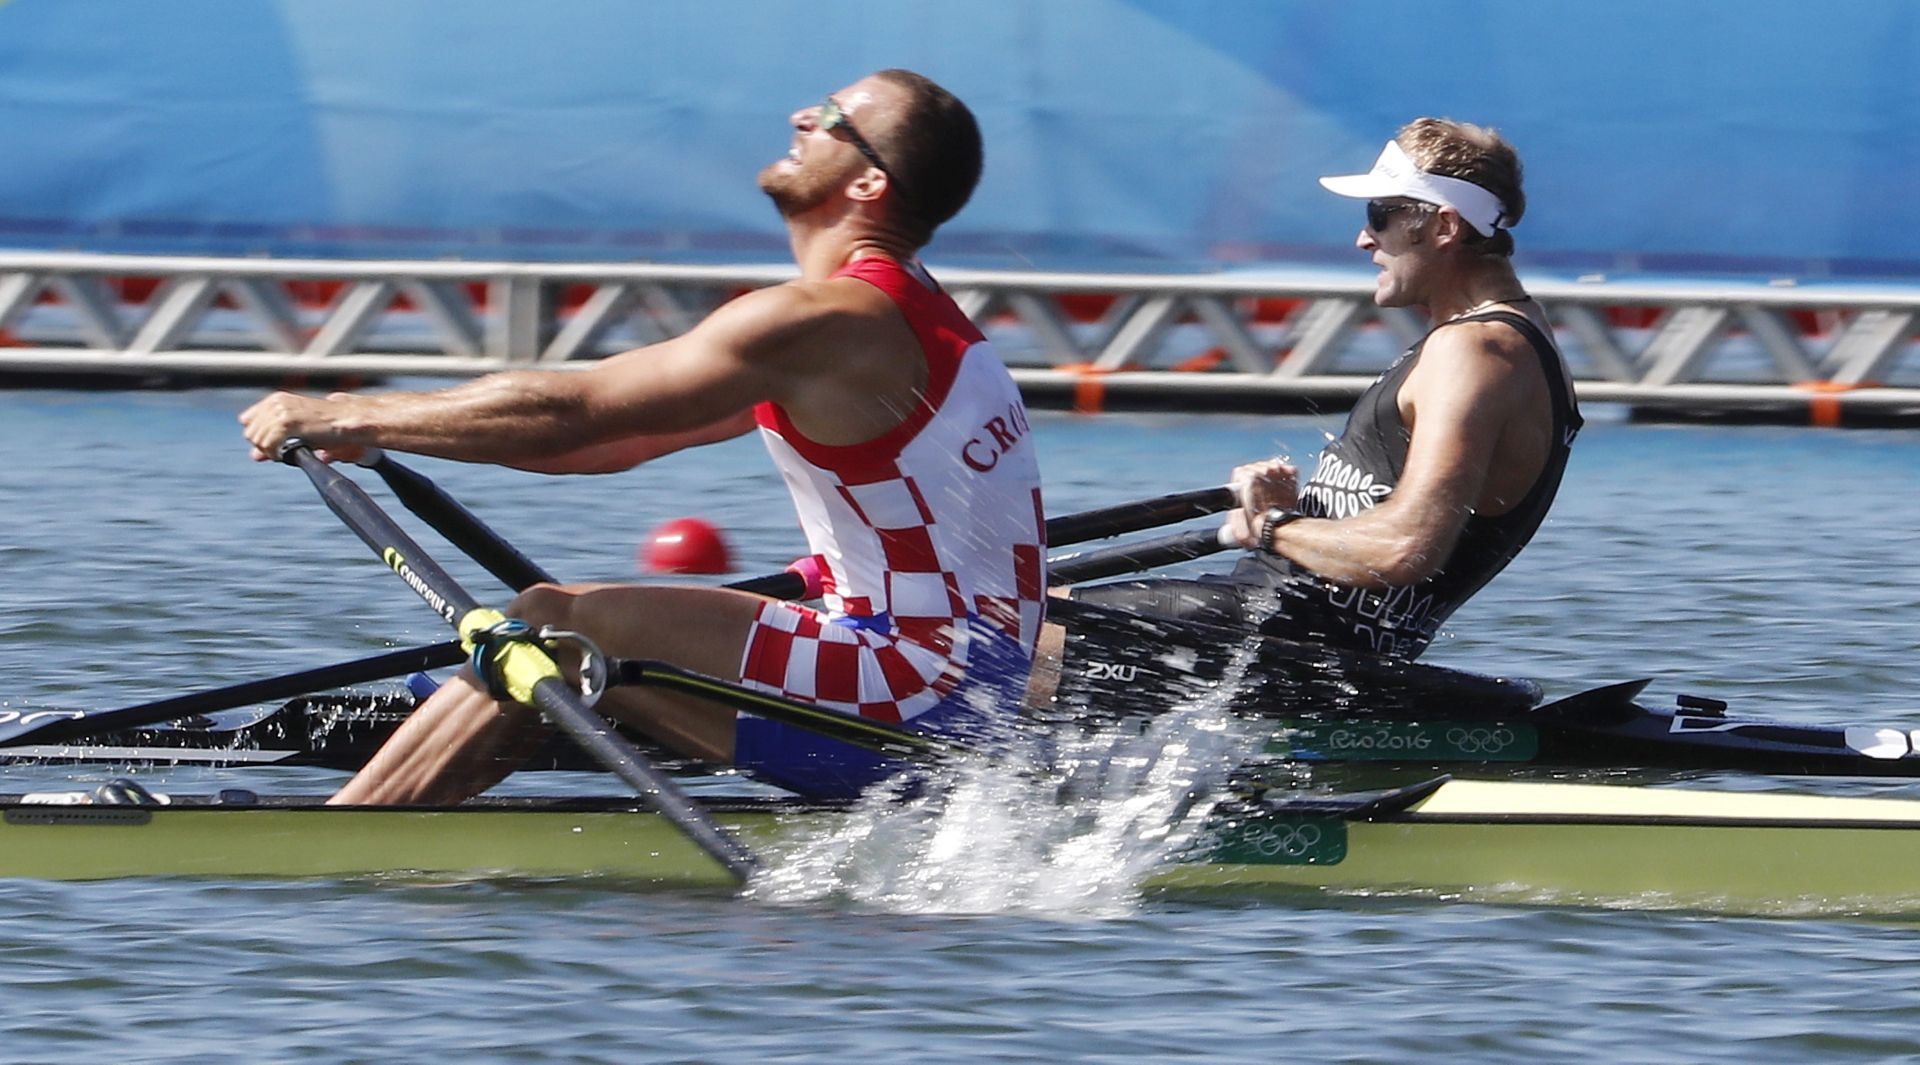 epa05480012 Croatia's Damir Martin (L, silver) and New Zealand's Mahe Drysdale (R, gold) in action during the men's Single Sculls Final of the Rio 2016 Olympic Games Rowing events at the Lagoa Rodrigo de Freitas in Rio de Janeiro, Brazil, 13 August 2016.  EPA/DIEGO AZUBEL